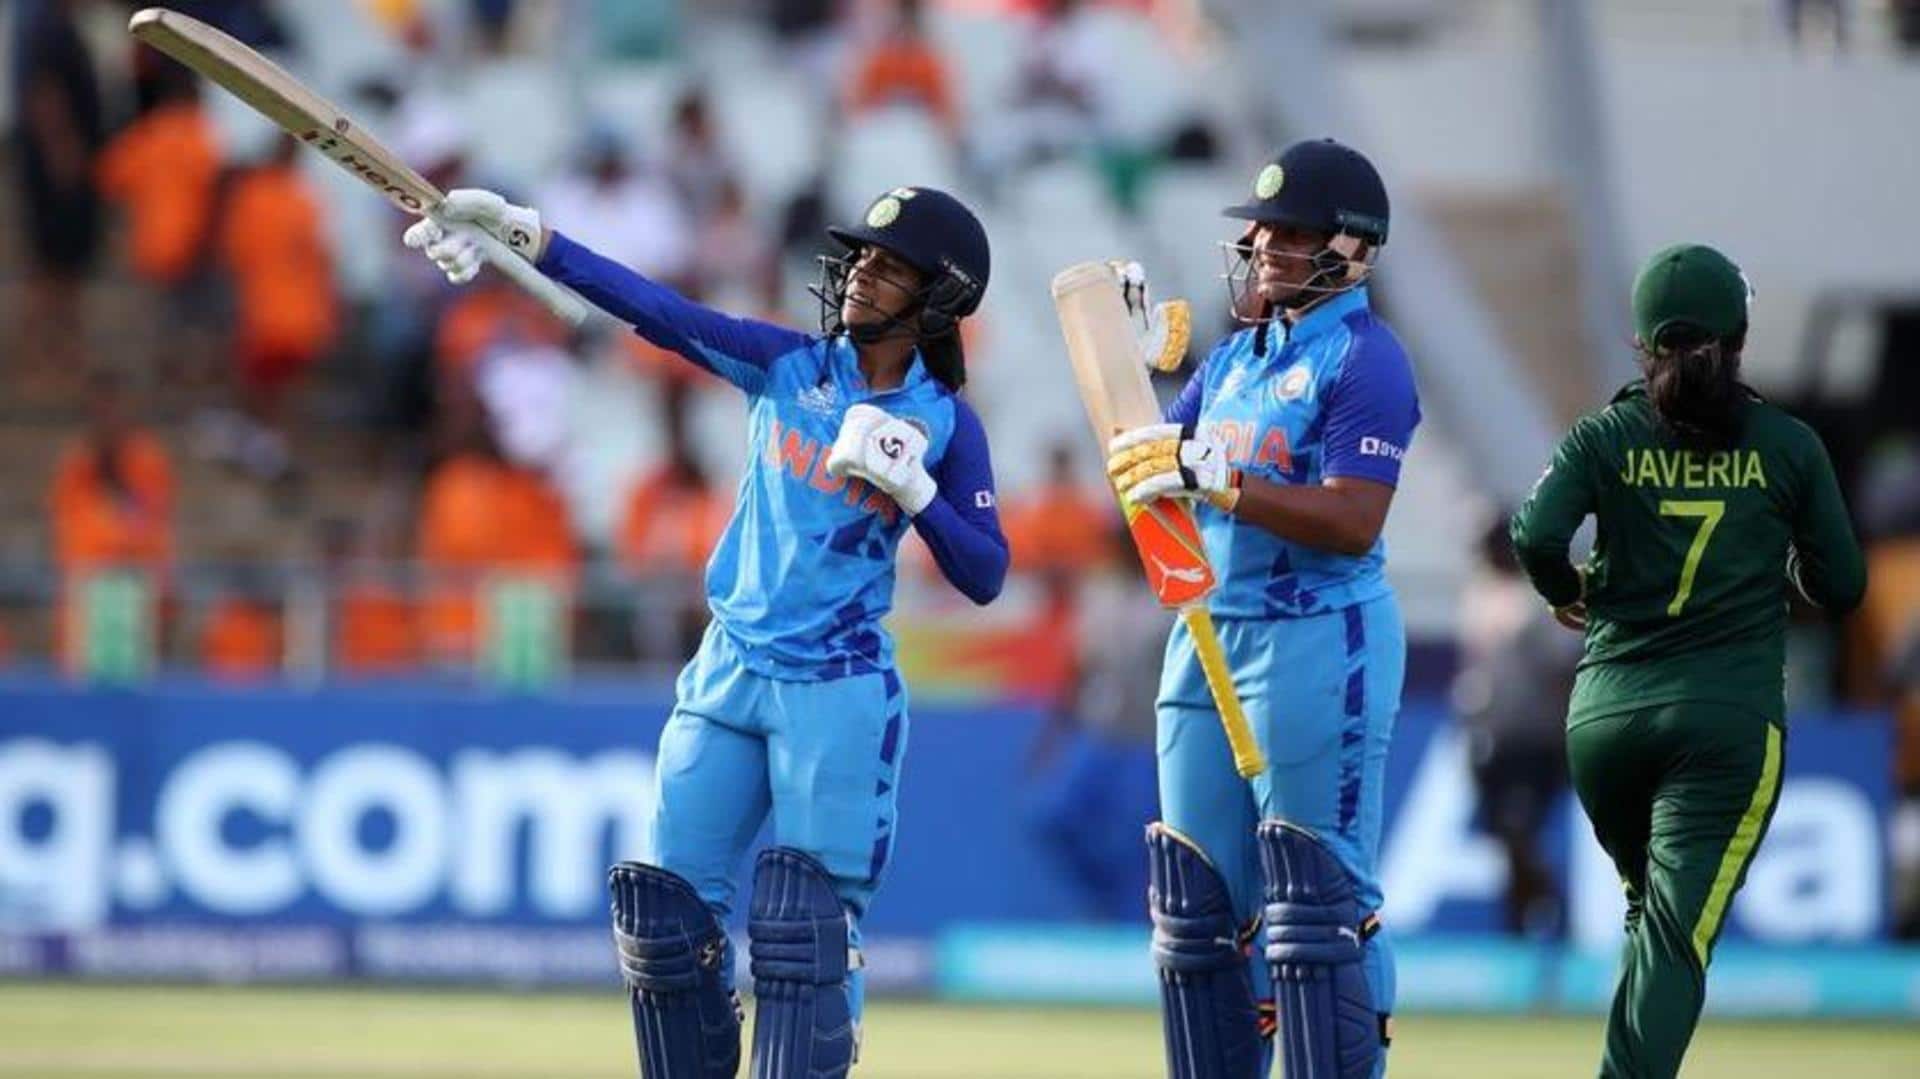 ICC WT20I Player Rankings: Rodrigues, Ghosh rise among batters